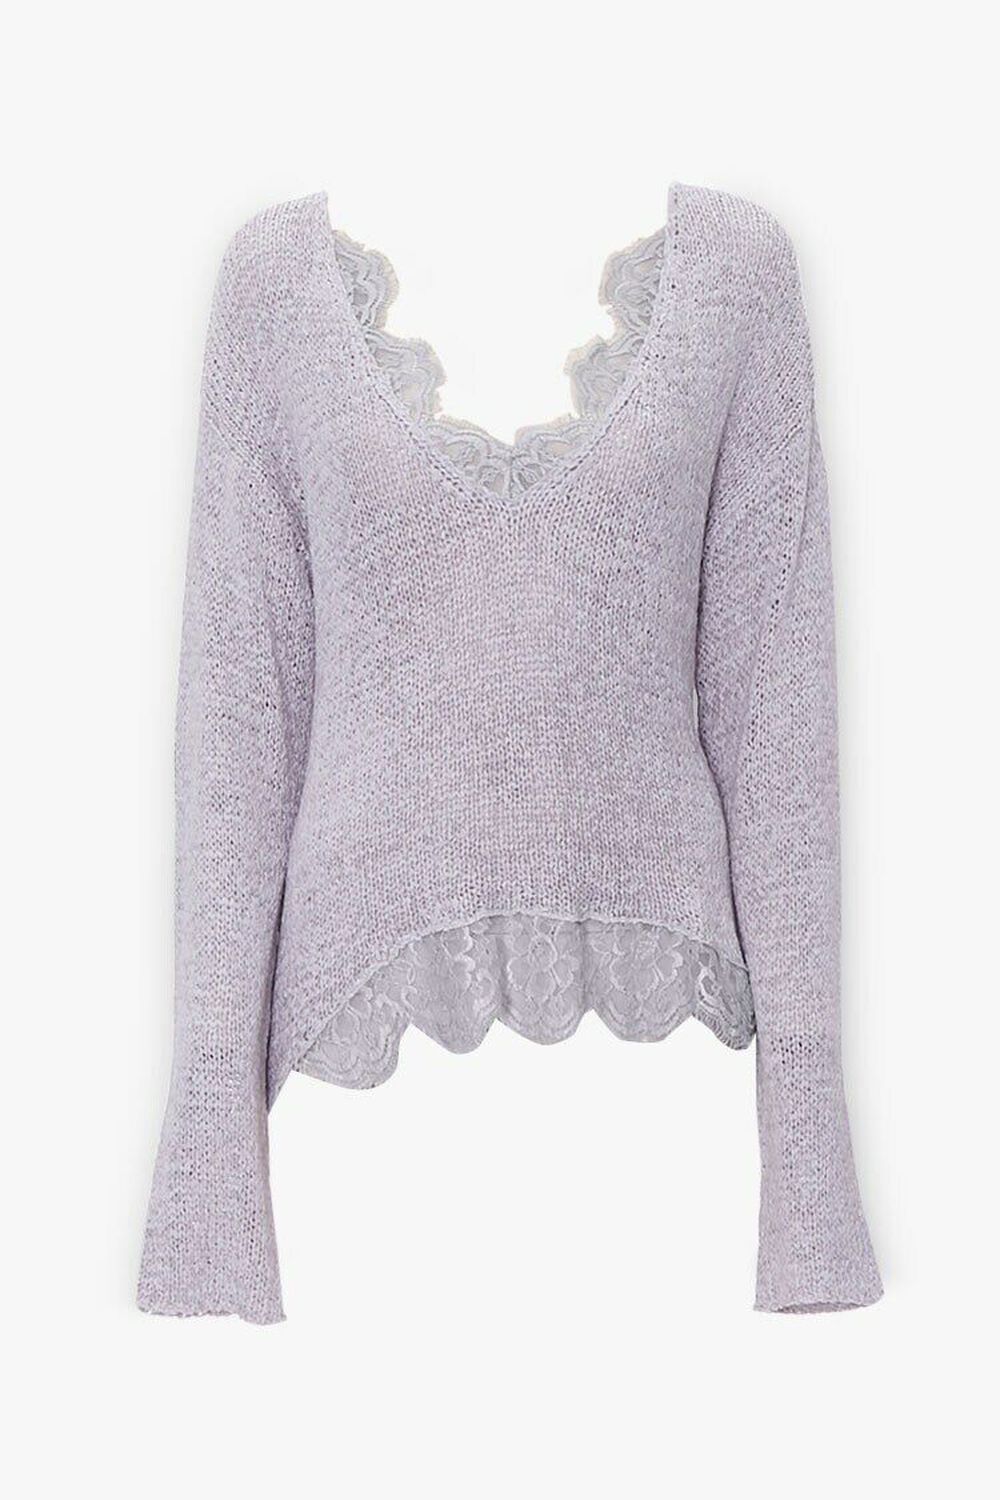 HEATHER GREY Ribbed Lace-Trim Sweater, image 1